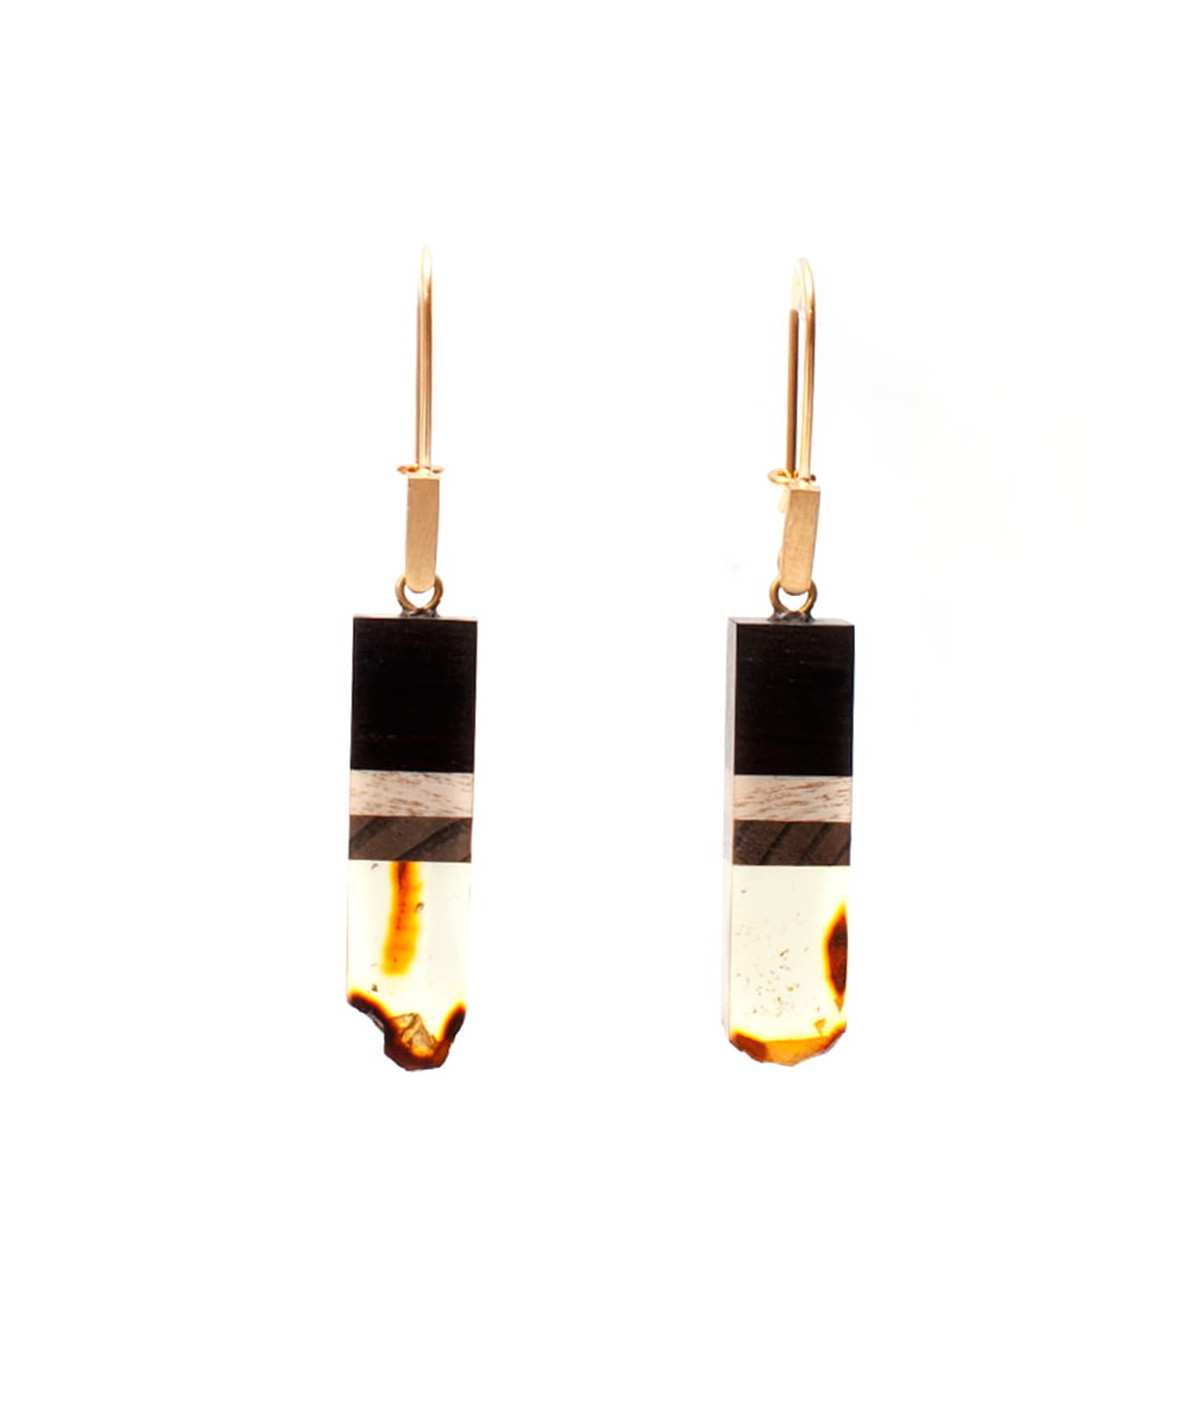 Earrings made of amber and wood on gold plated hooks.